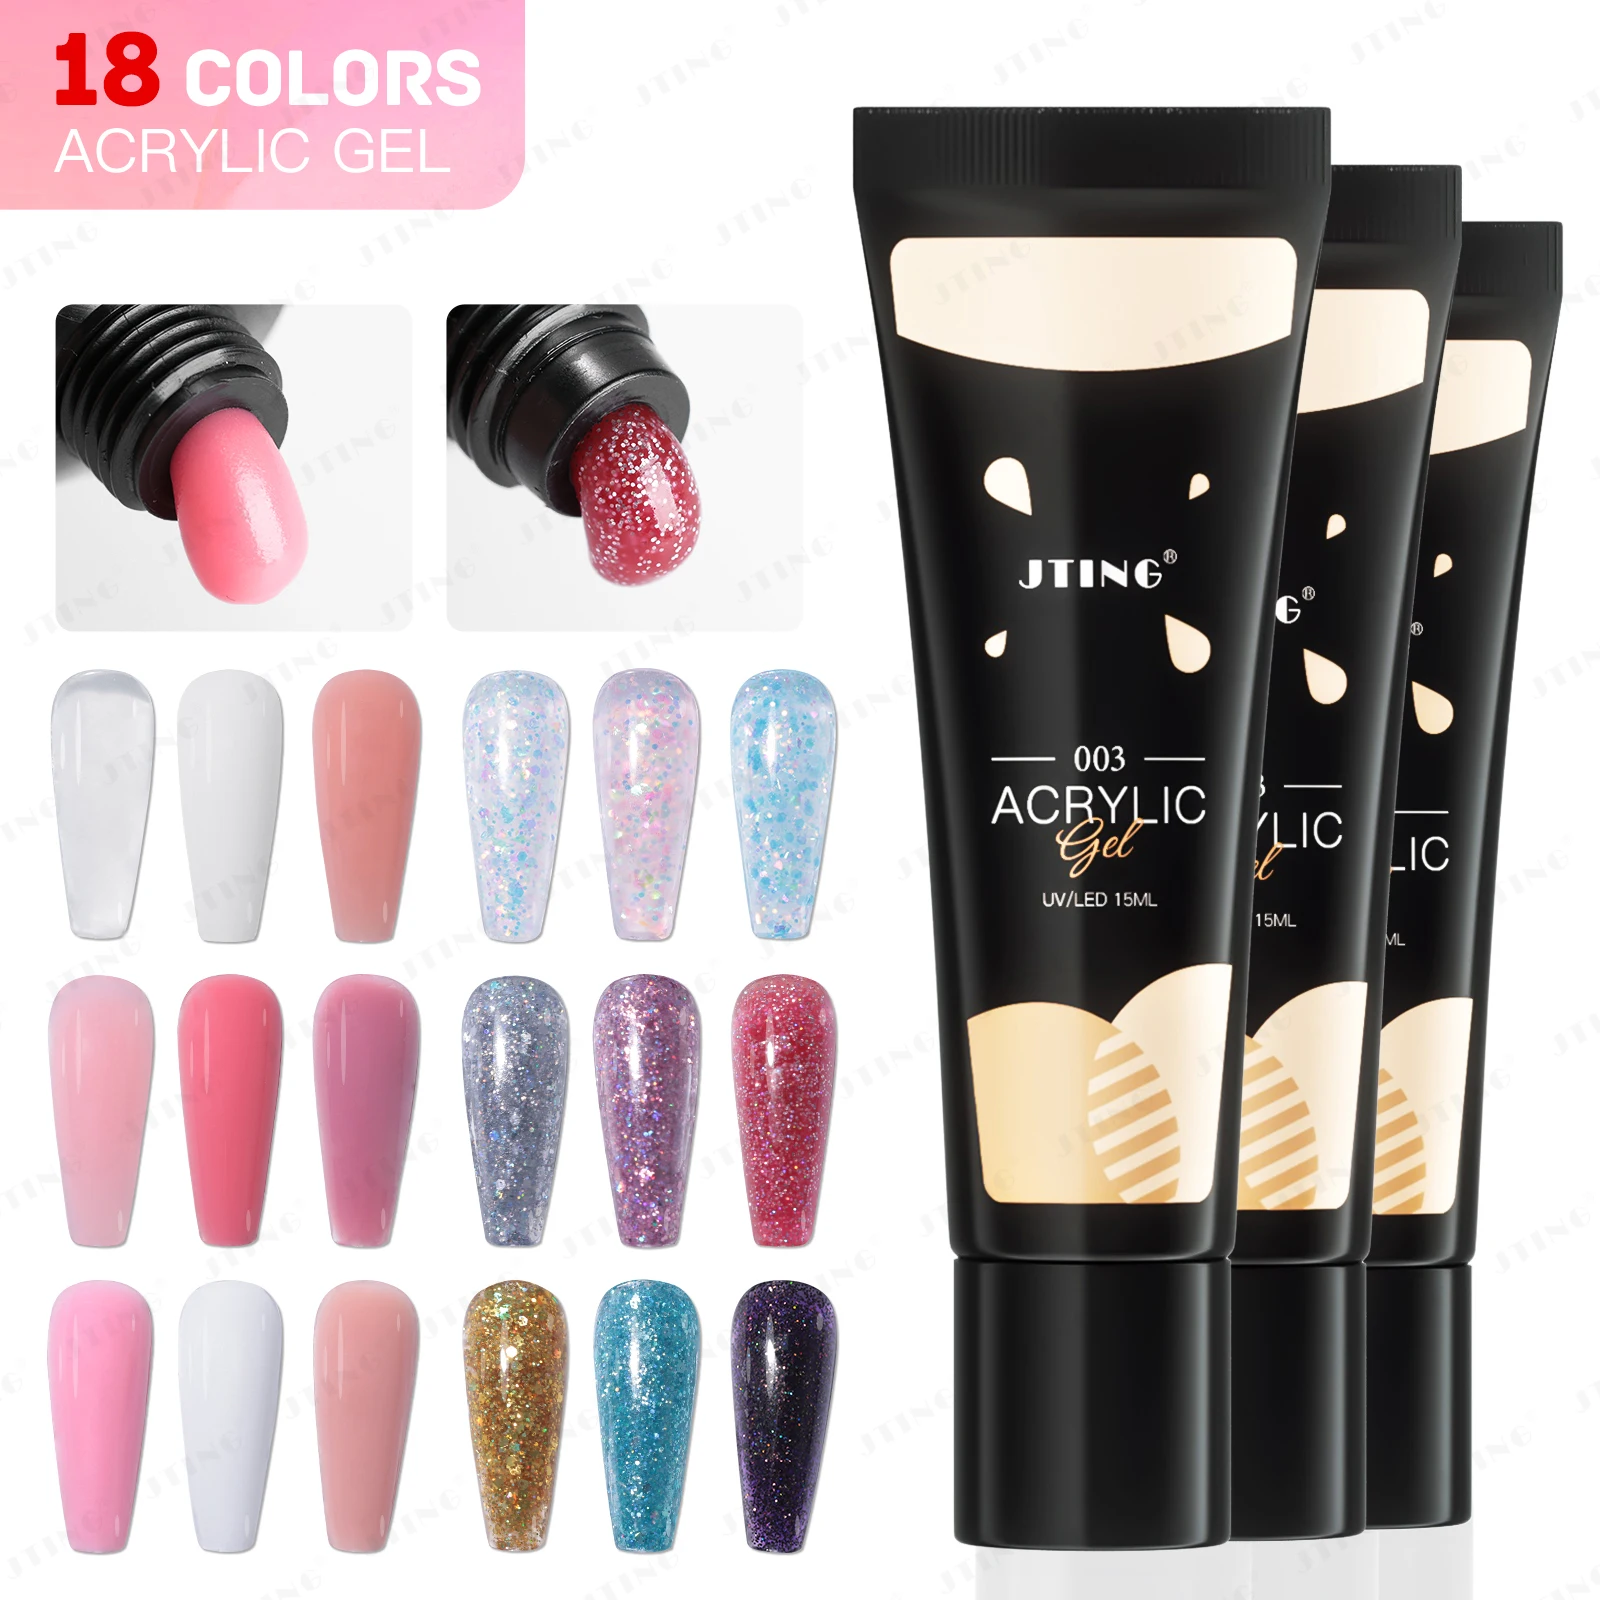 

JTING Professional Easy Apply 18colors acryl gel polish OEM ODM Soak off Glitter Colors poly gel acrylic nails extension set